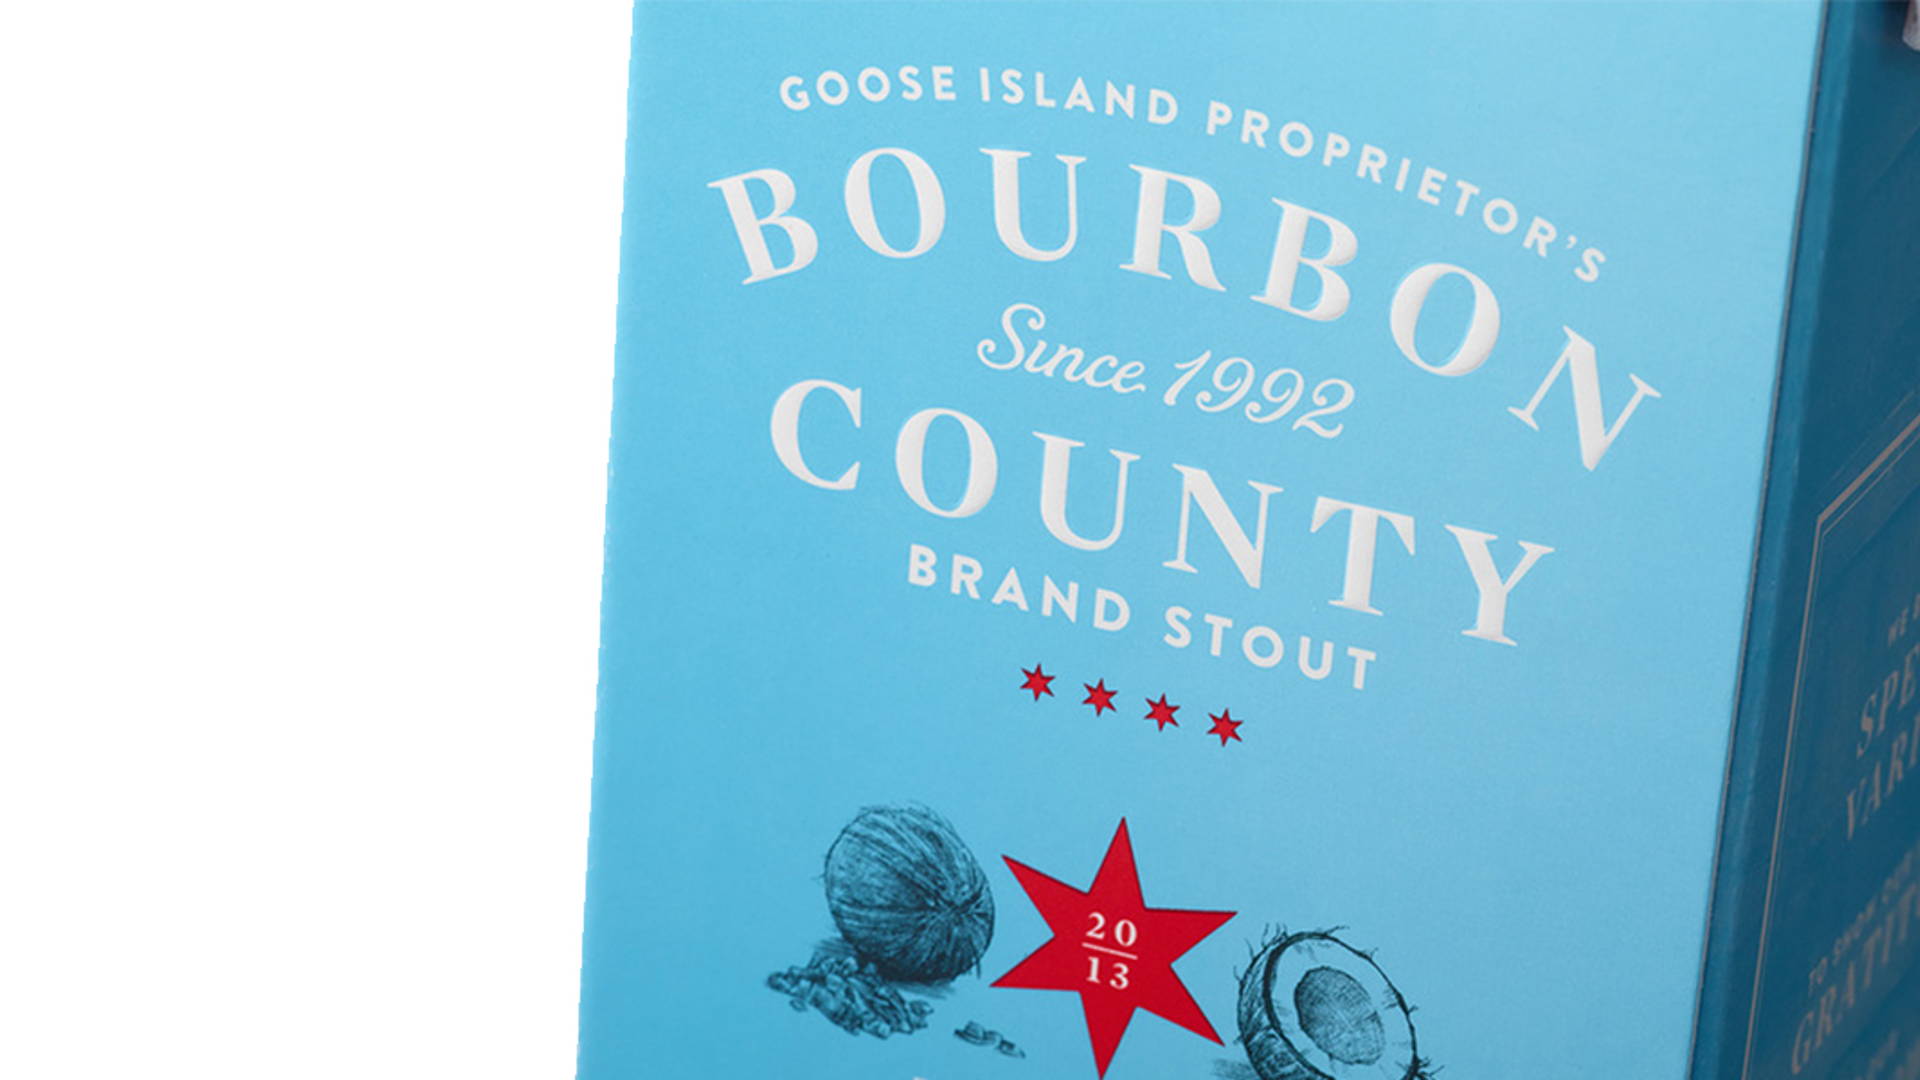 Featured image for Goose Island Proprietor’s Bourbon County Brand Stout